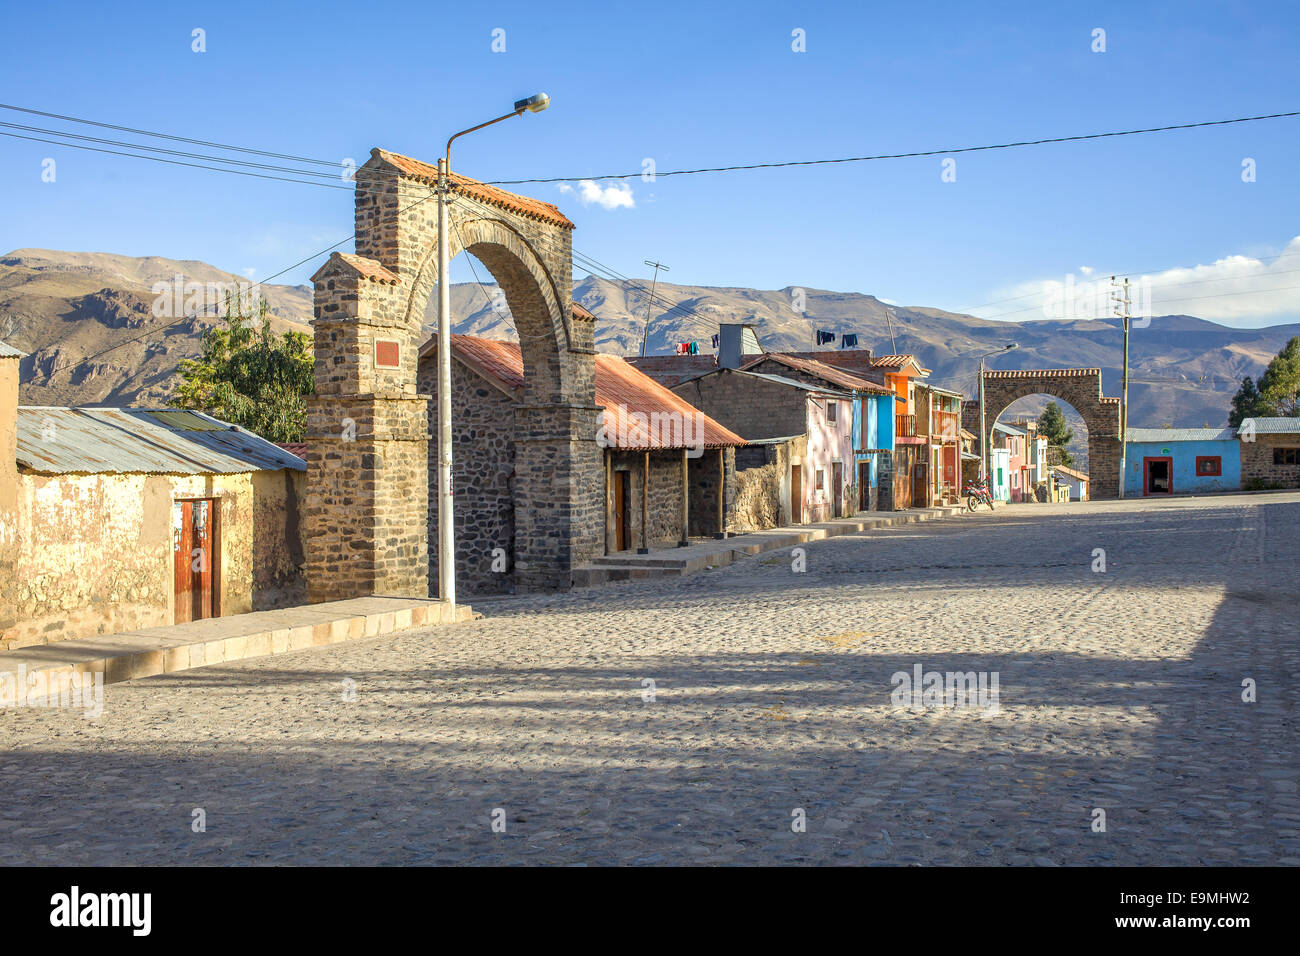 Coporaque, a real Indian town in the Colca Canyon in Peru Stock Photo